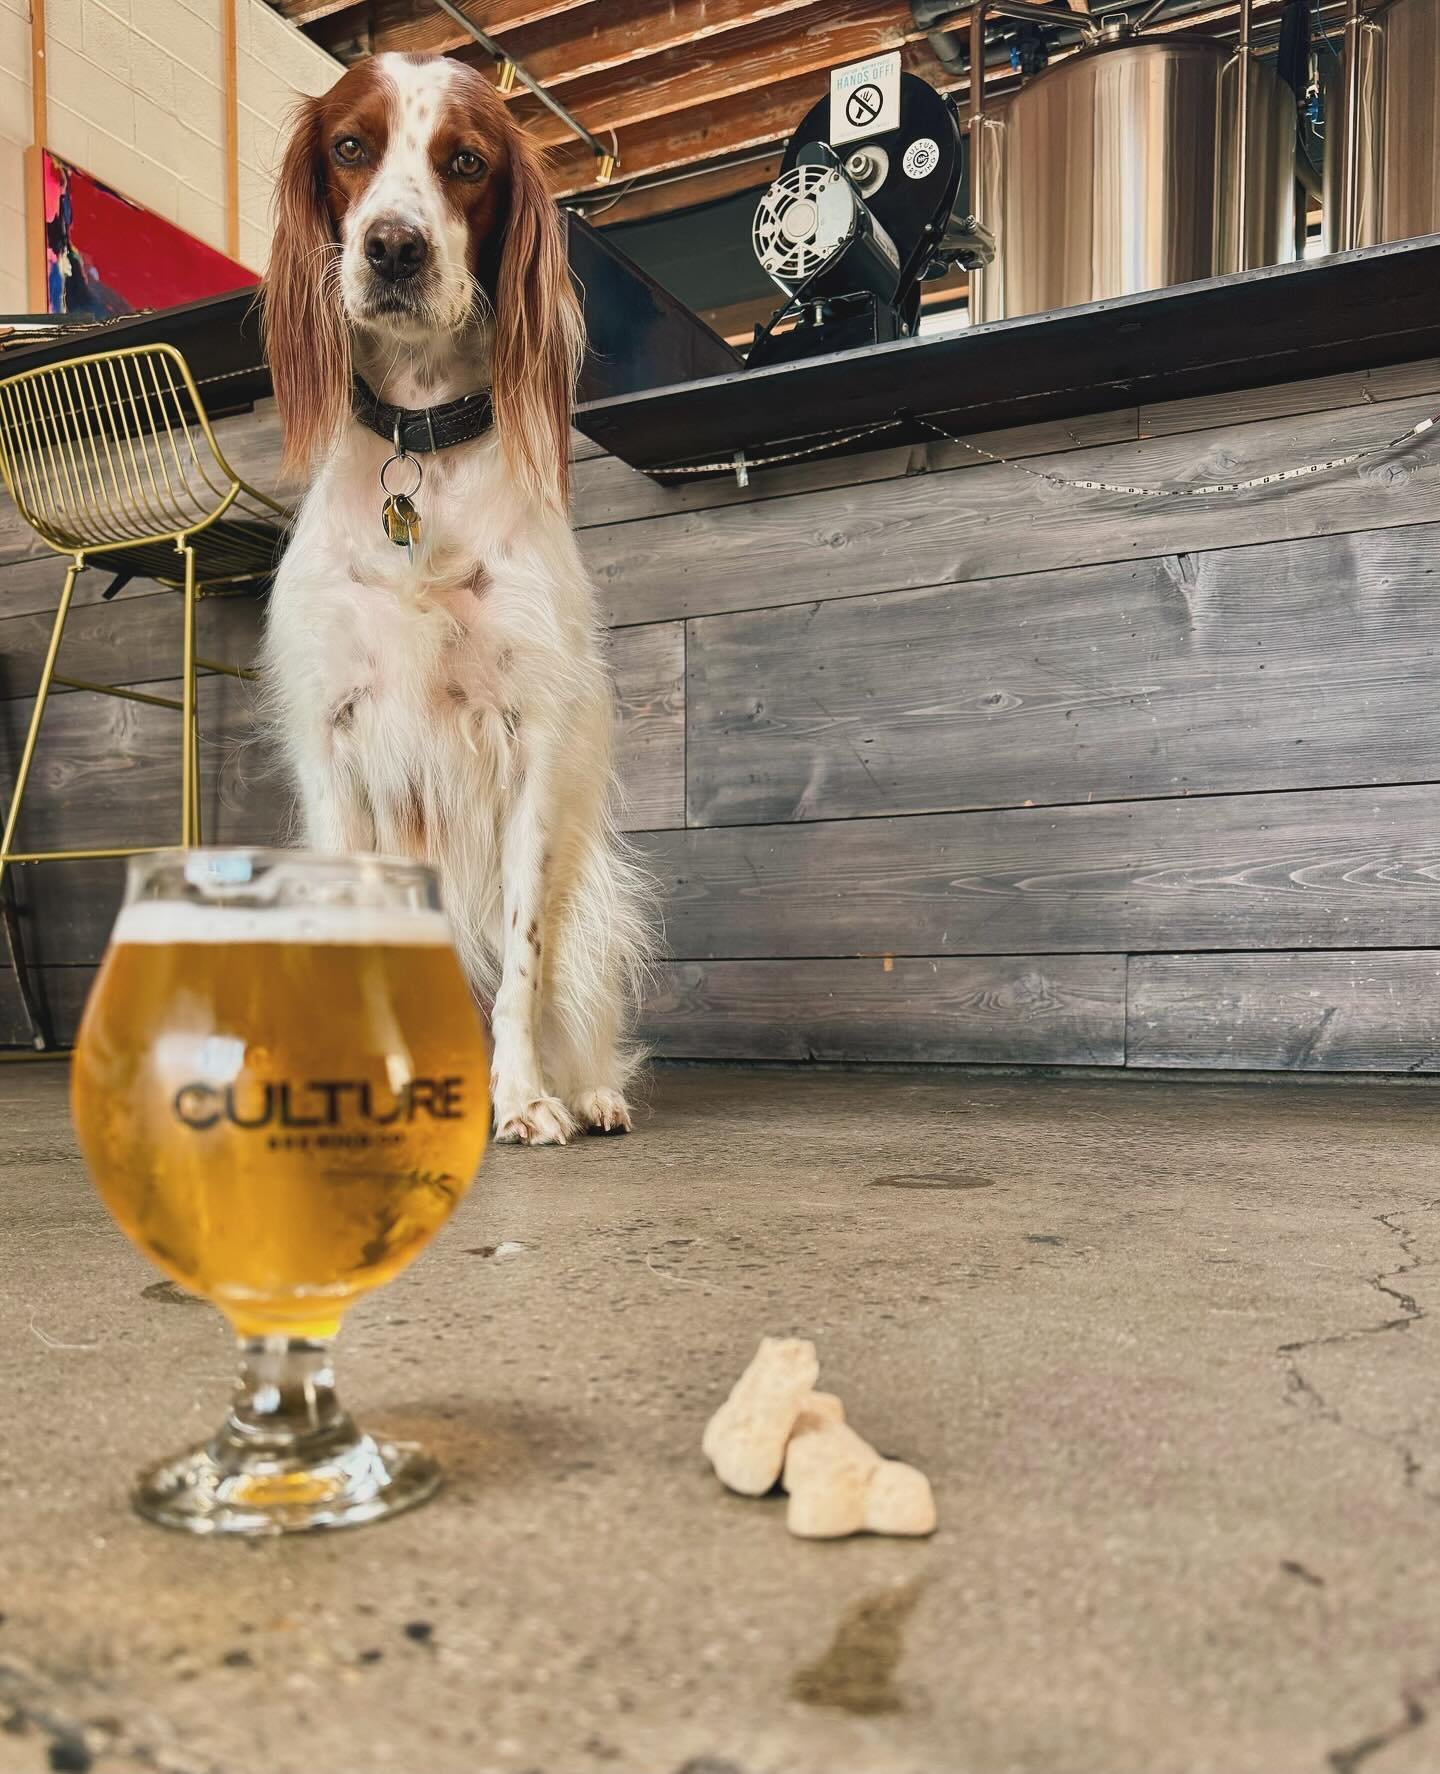 Wednesdays mean YAPPY HOUR at all locations. 🐾🍻

Come by today and every Wednesday between 5p-7p and receive a discount on pints and dog treats!! #Woof